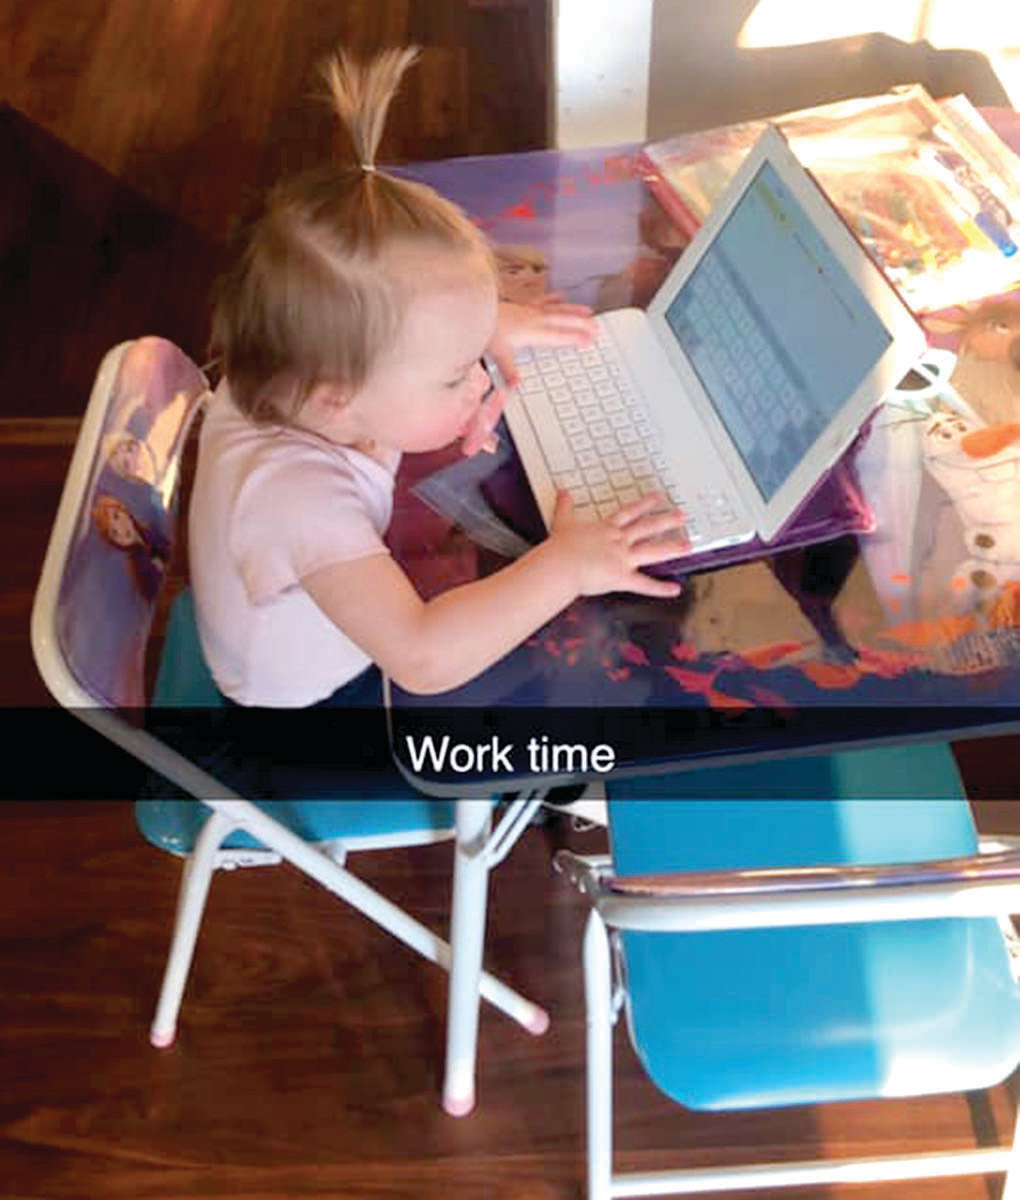 Trudy and Ryan Parkhurst set their daughter, Ryder, up with her own desk so she can “work” while mommy does.